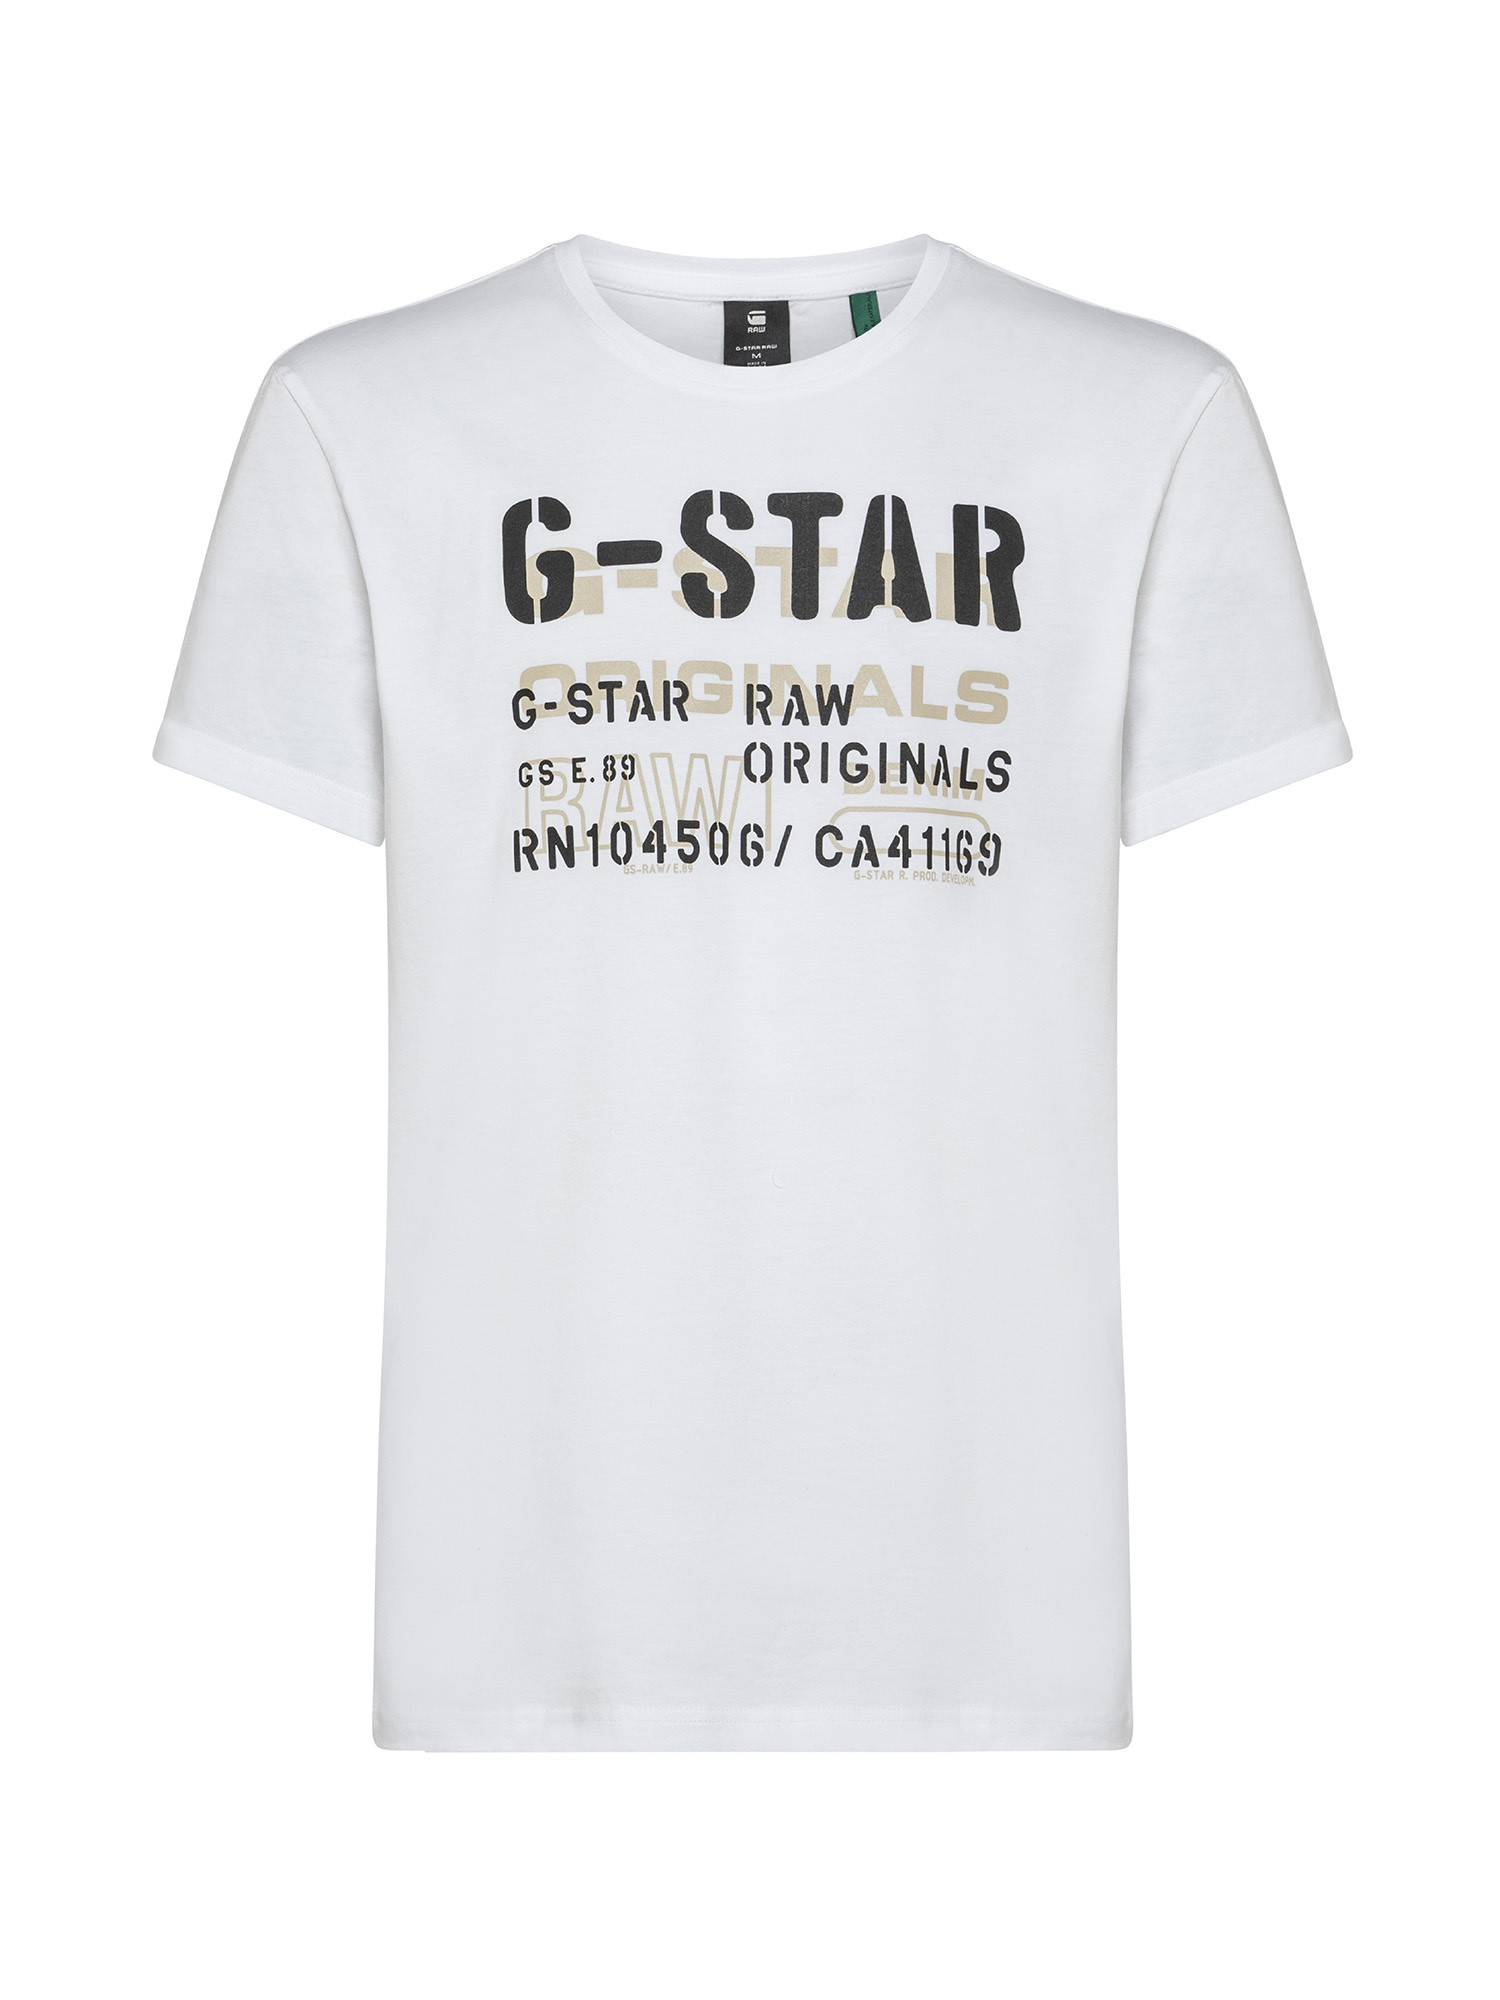 G-Star - T-shirt with print, White, large image number 0